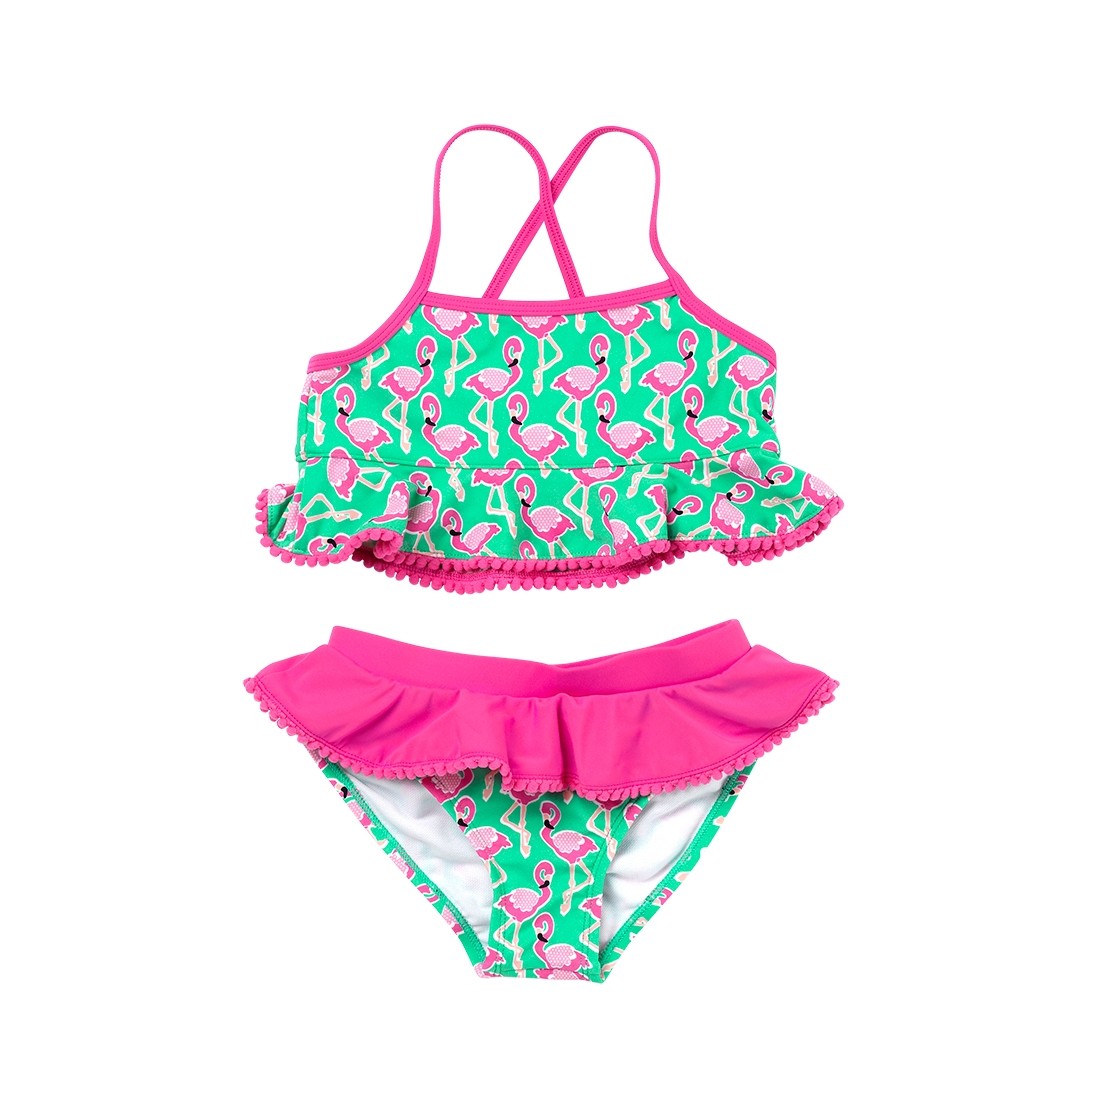 Girls Swimsuit Set with Ruffles by Monogram Boutique